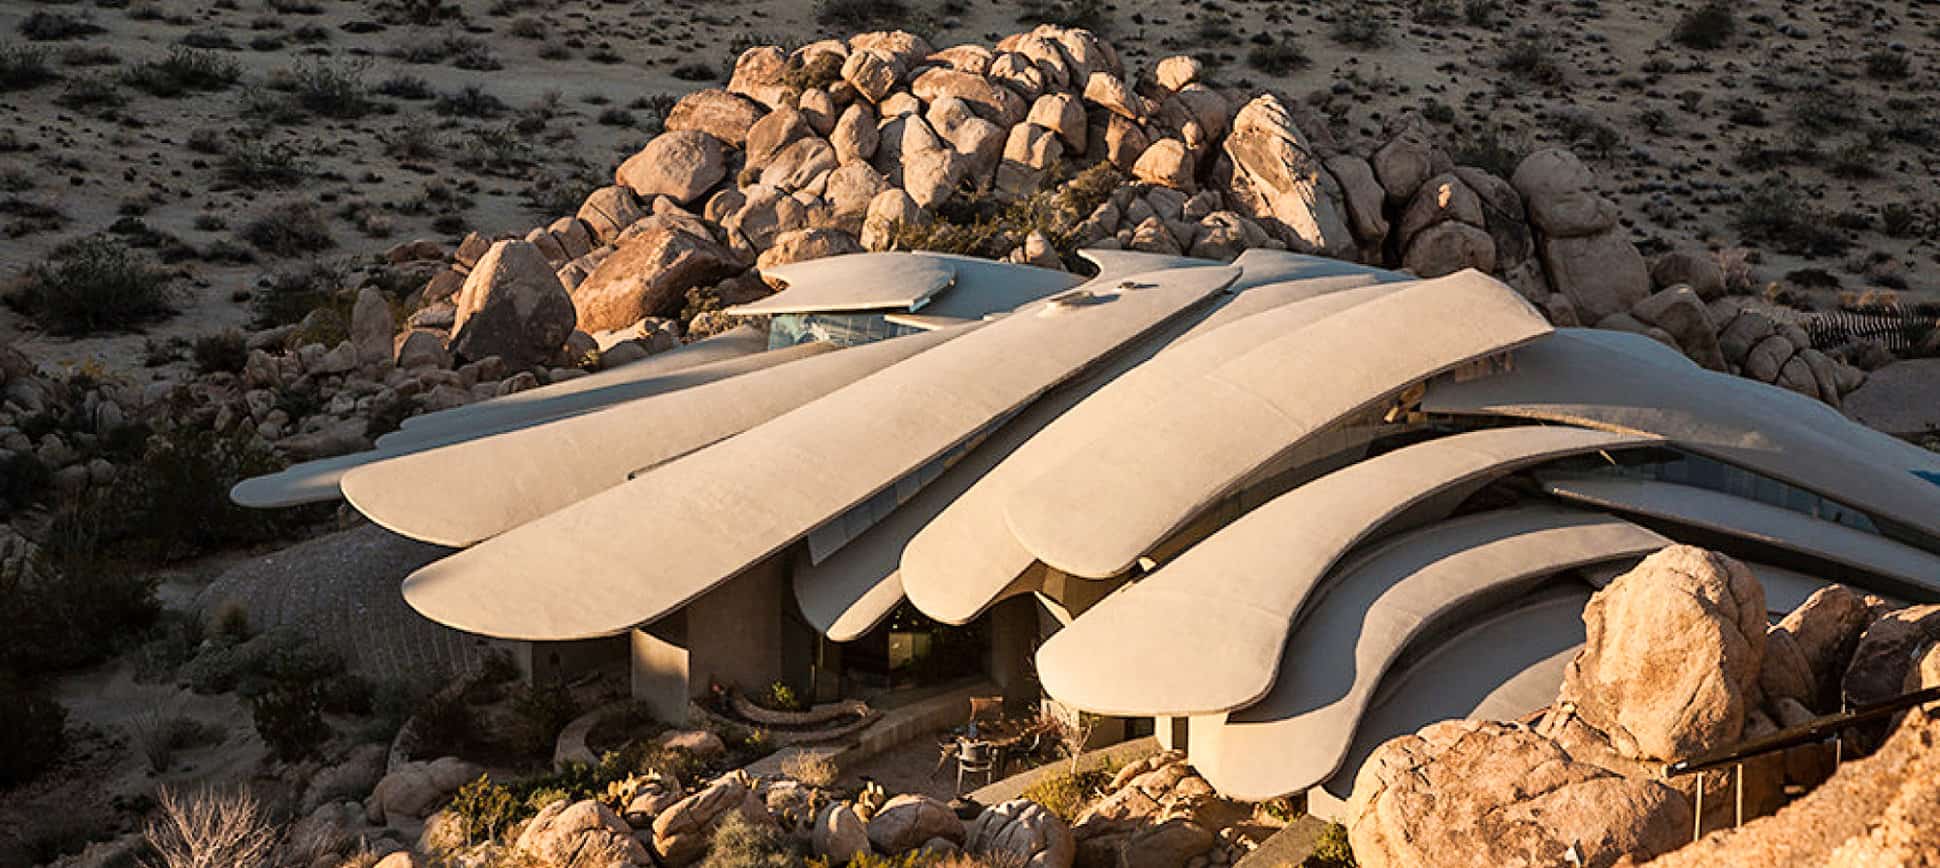 this-outrageous-alien-like-desert-mansion-is-for-sale